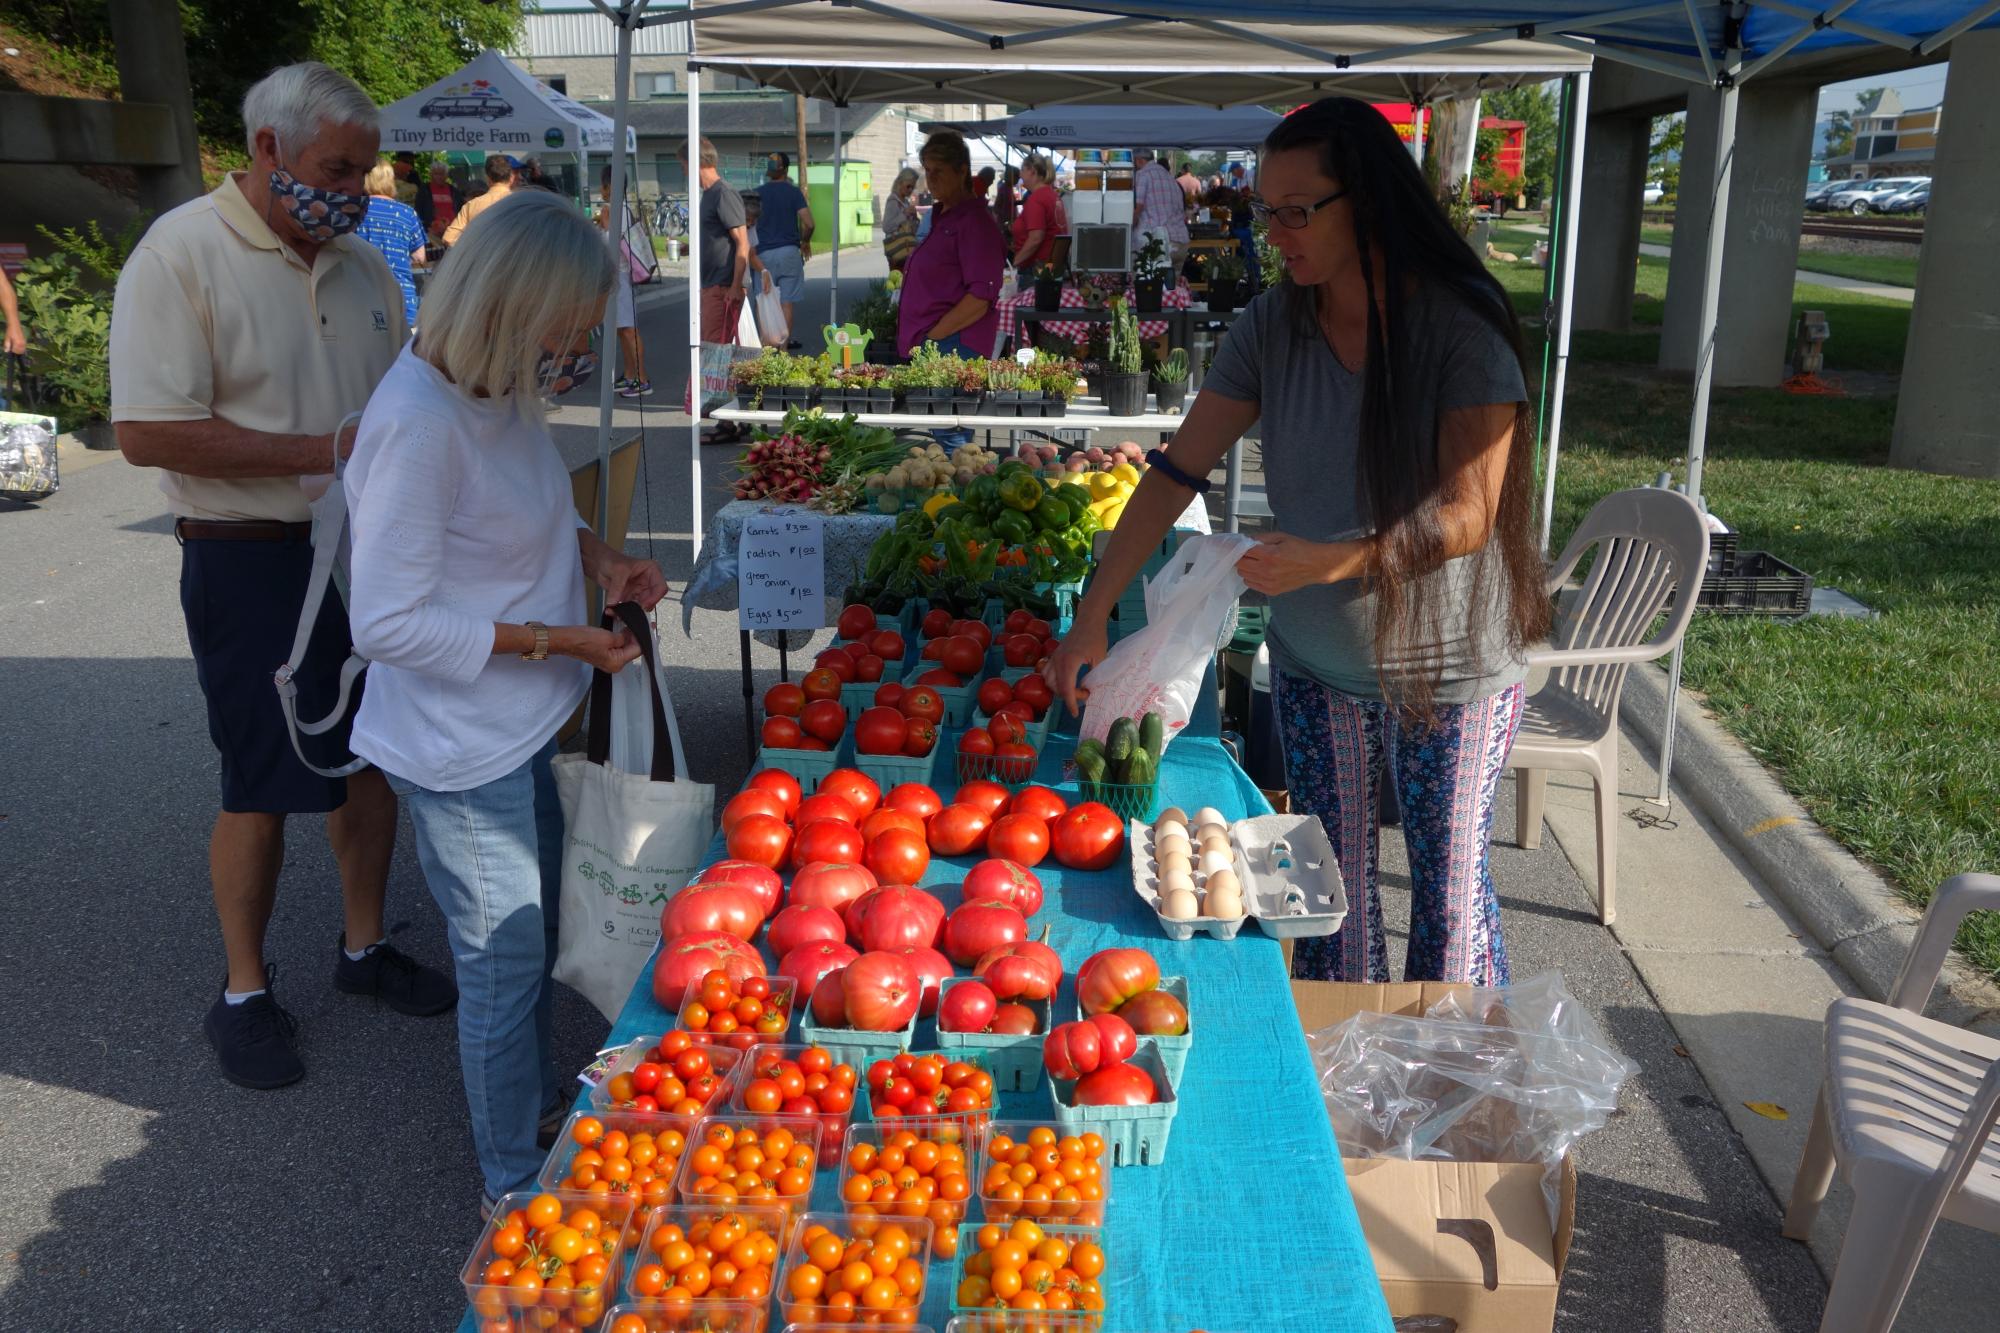 Vendor selling tomatoes to a customer